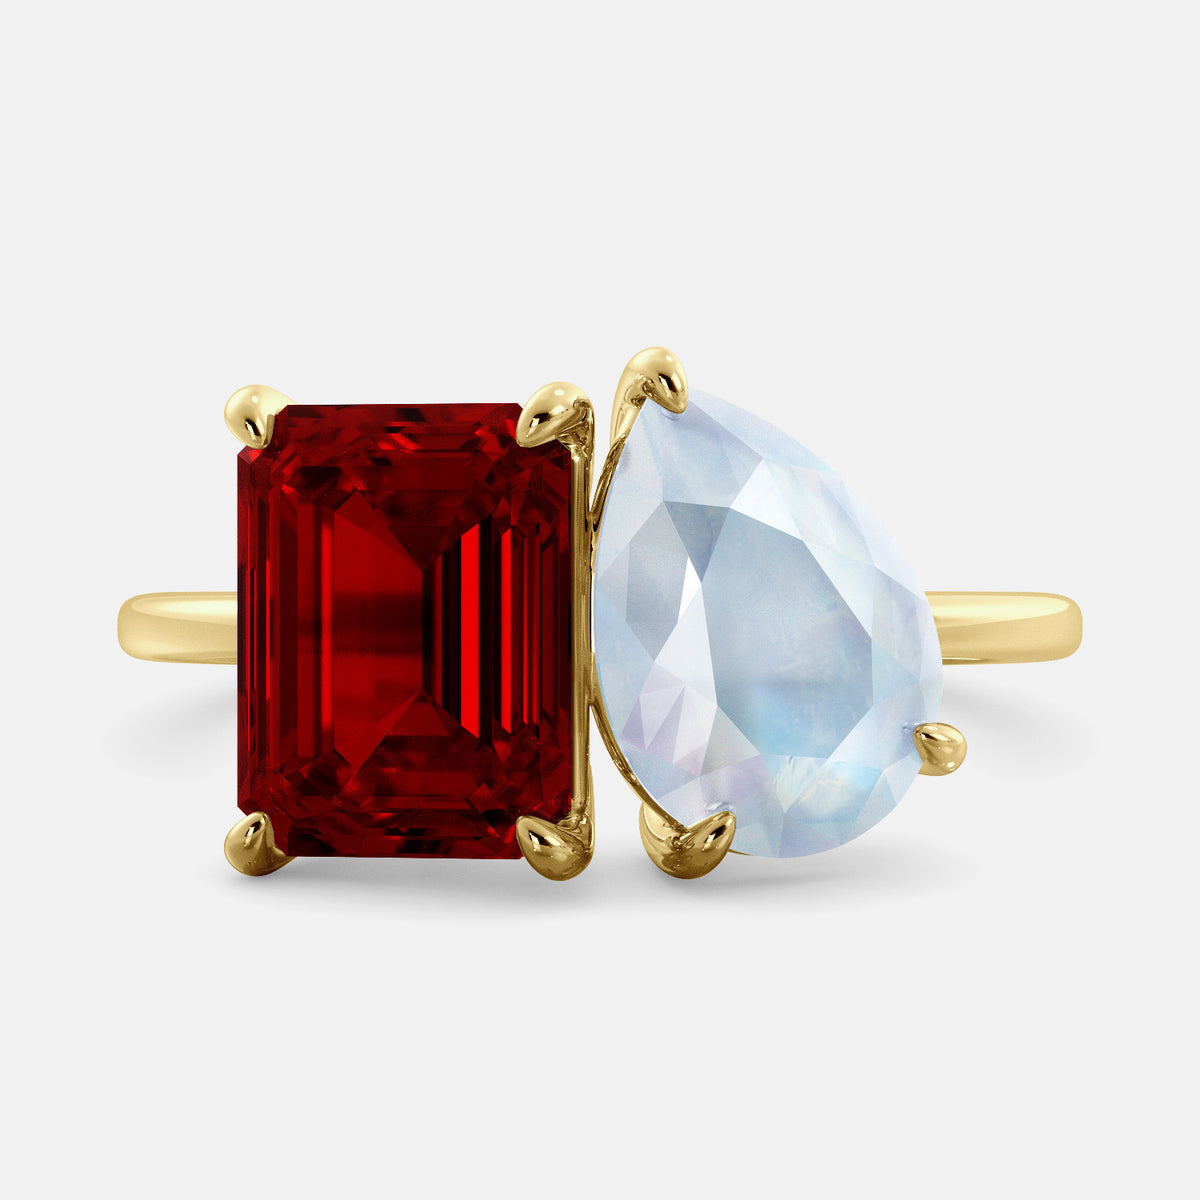 A toi et moi ring with an emerald-cut ruby and a pear-cut gemstone. The emerald-cut morganite is set on the left of the ring, and the pear-cut gemstone is set on the right. The ring is made of recycled yellow gold and has a simple, elegant design. The pear-cut gemstone can be customized. **Here are some additional details about the image:** * The emerald-cut white ruby is a birthstone for July. * The pear-cut gemstone can be customized to any stone of your choice.